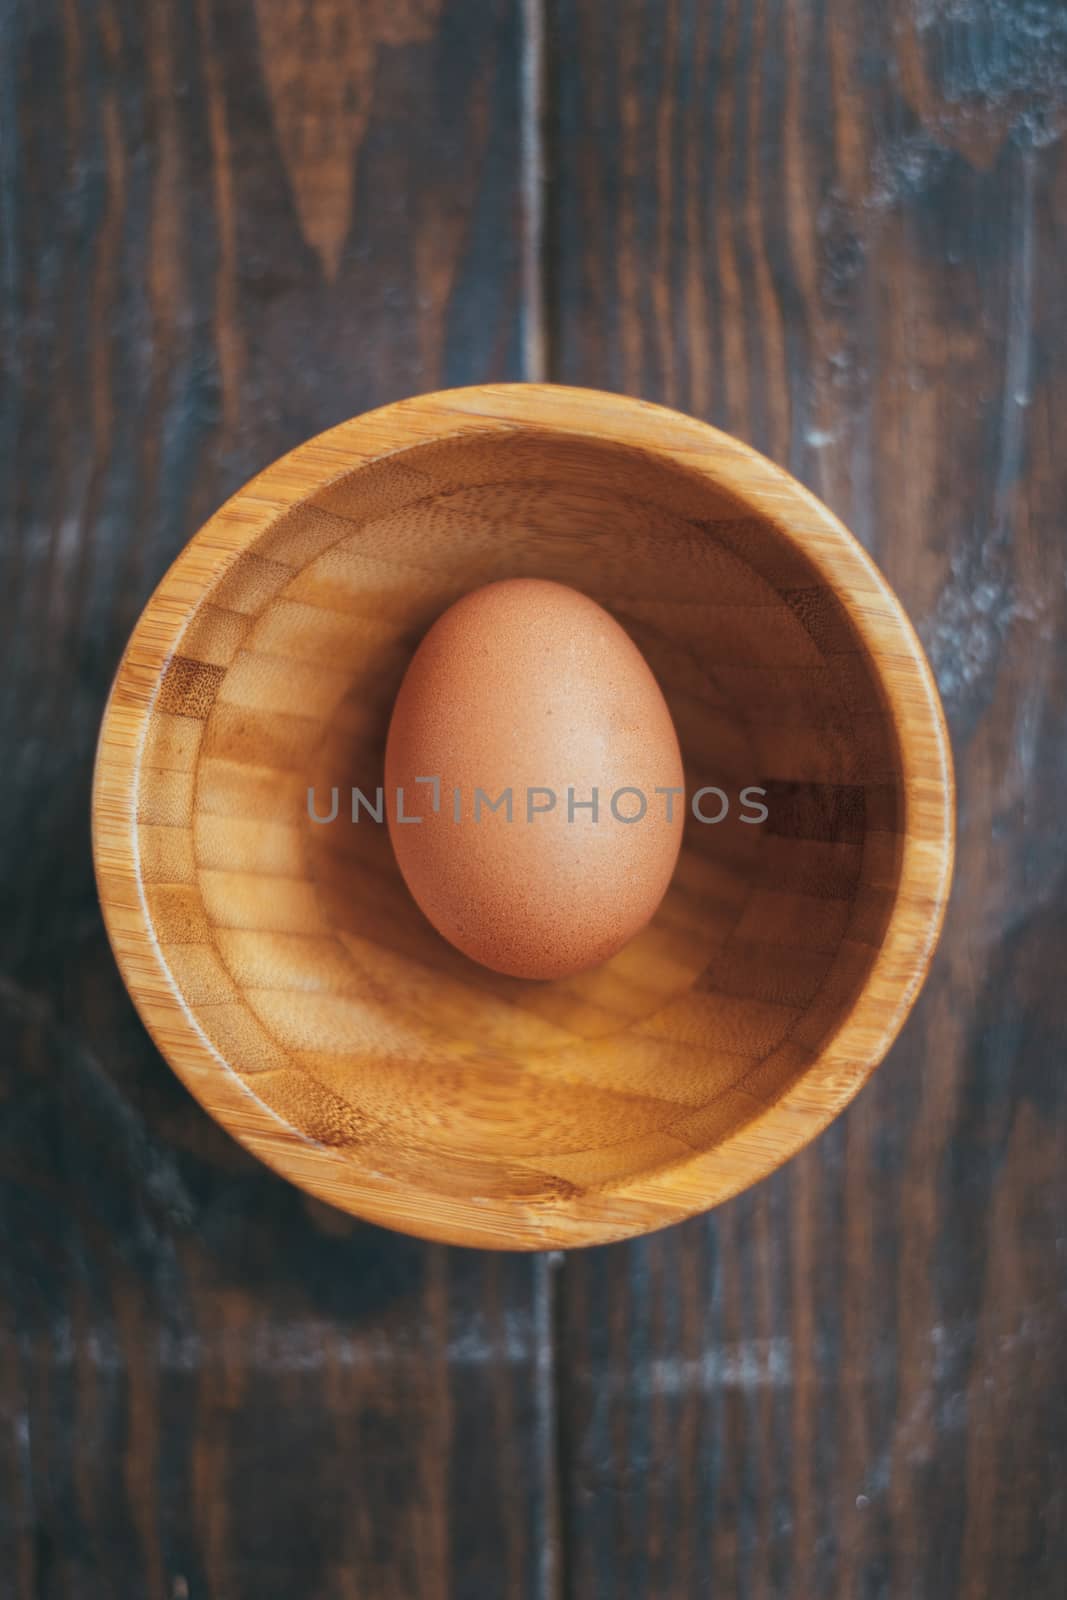 Organic egg in a wooden bowl on a wooden table